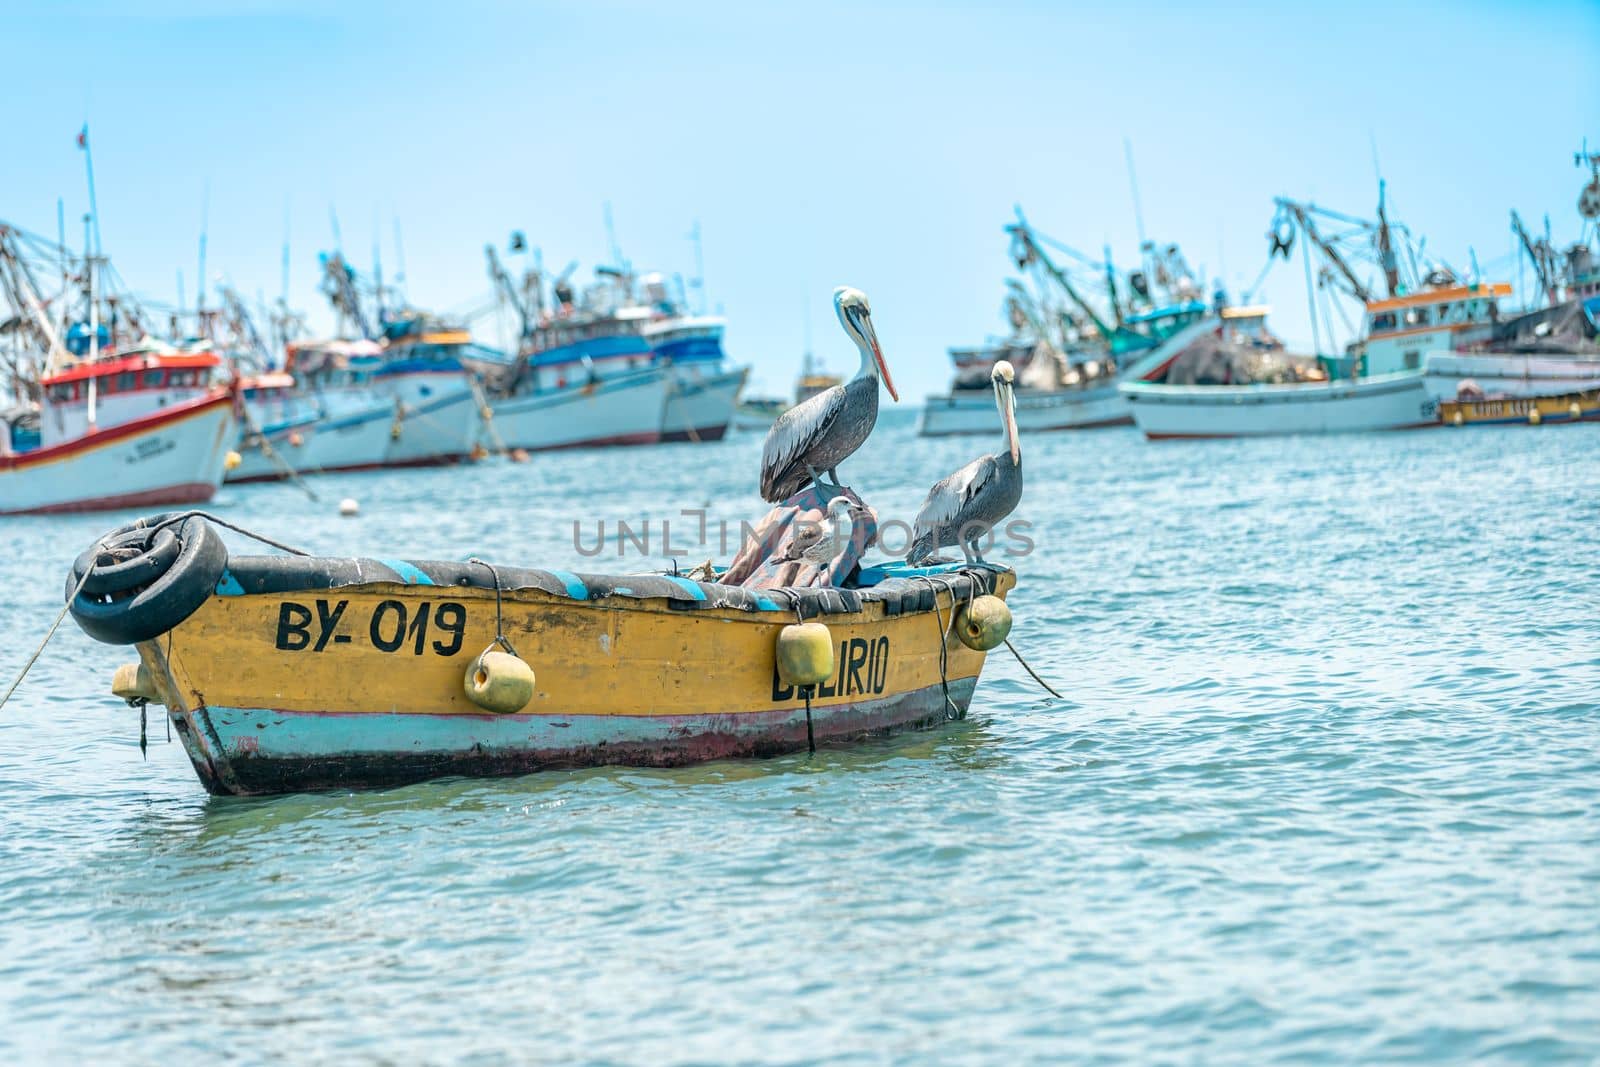 pelicans by the ocean shore on a fishing boat. 